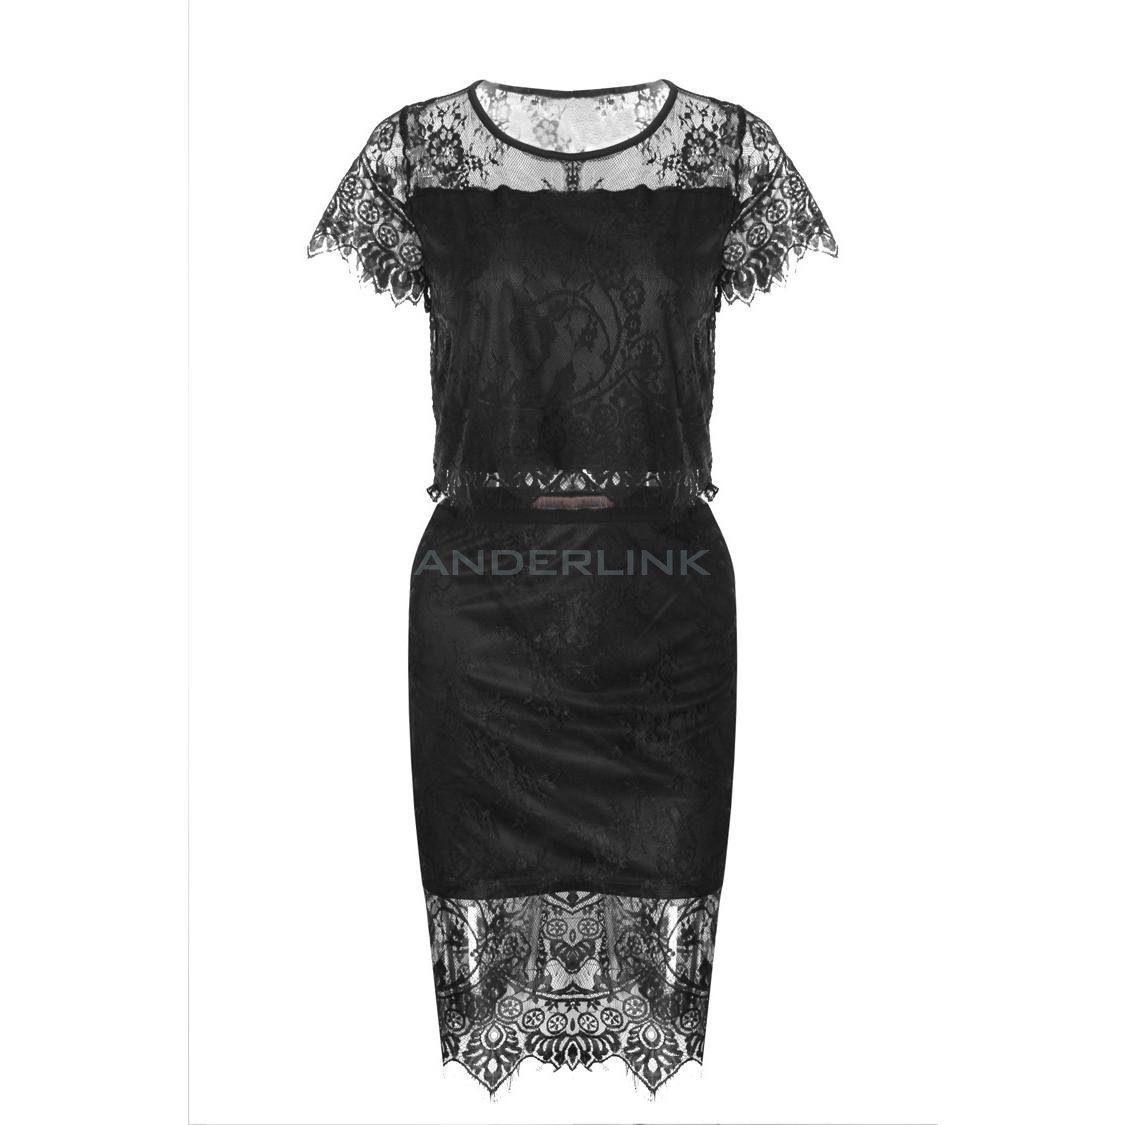 unknown New Women's Lace Black White Ladies Tops + Skirt 2 Piece Set Party Evening Dress